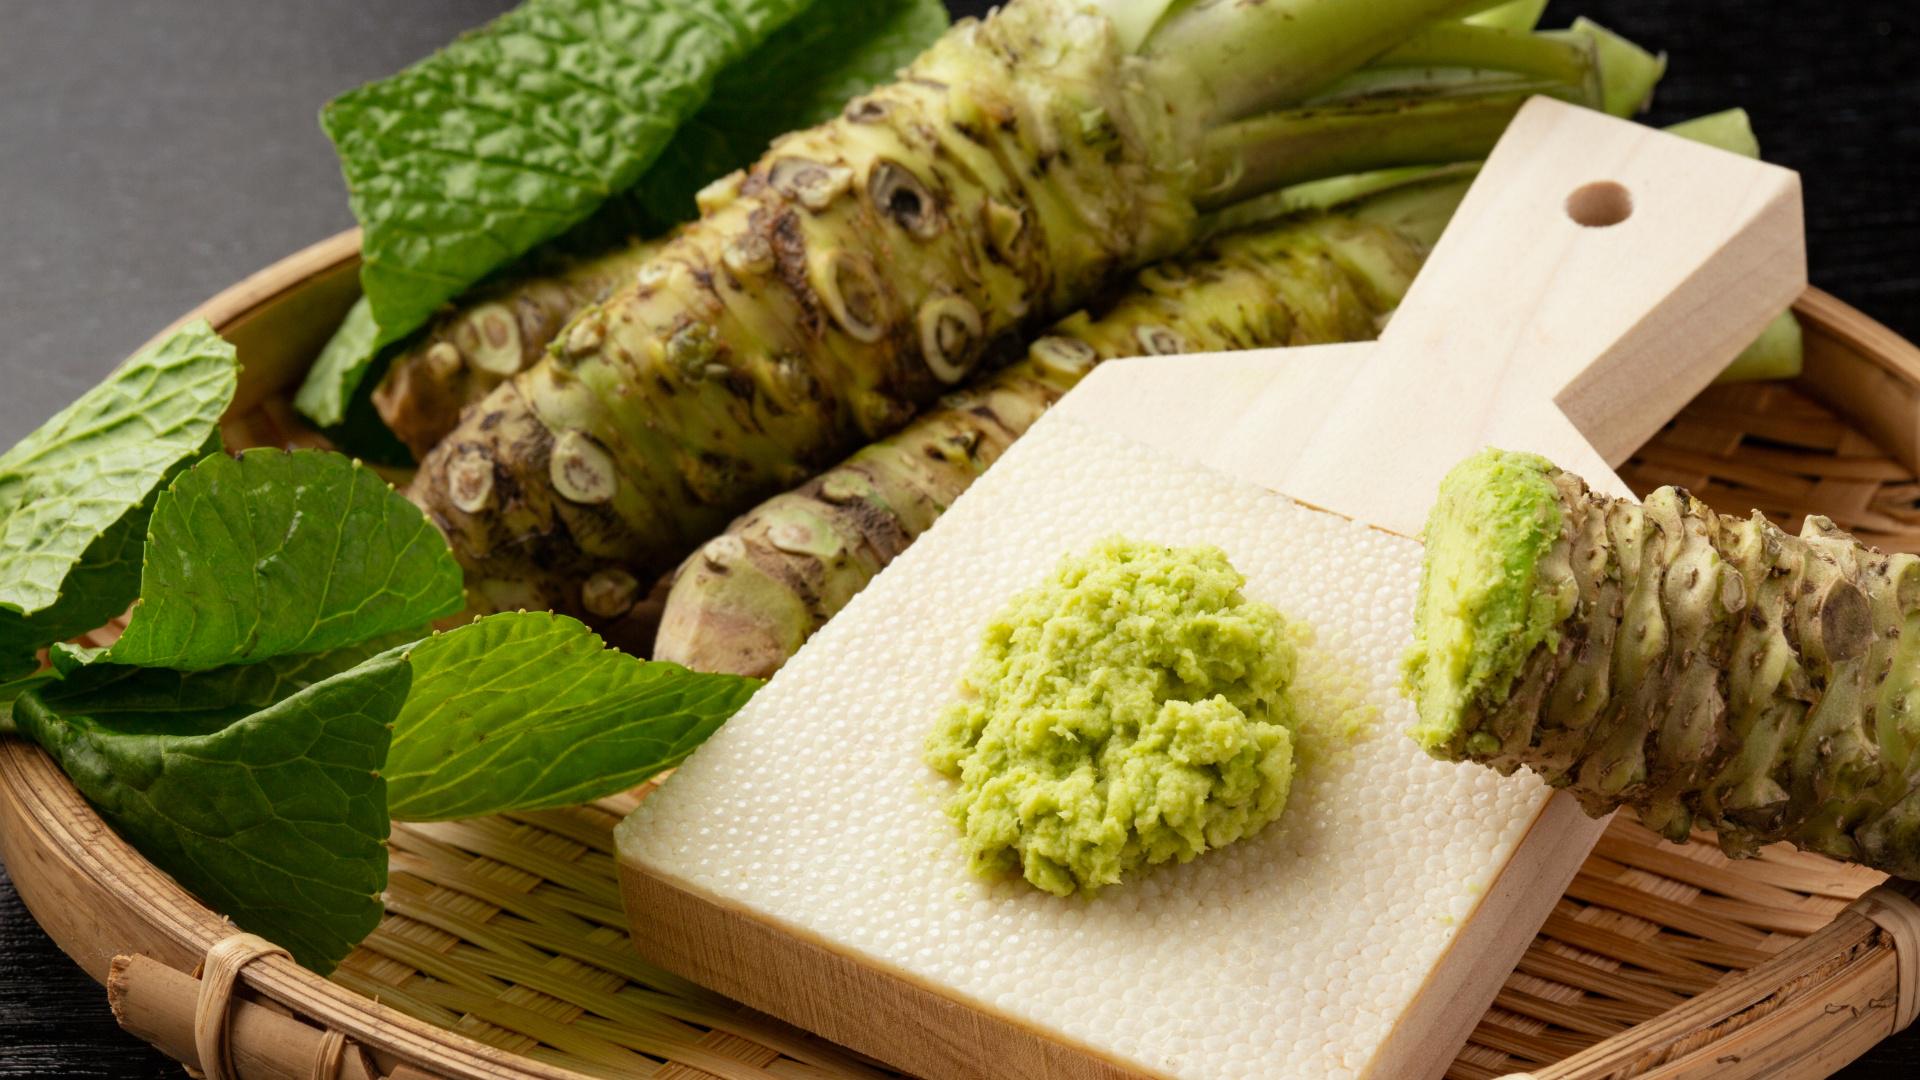 where does wasabi come from and what is real wasabi made of